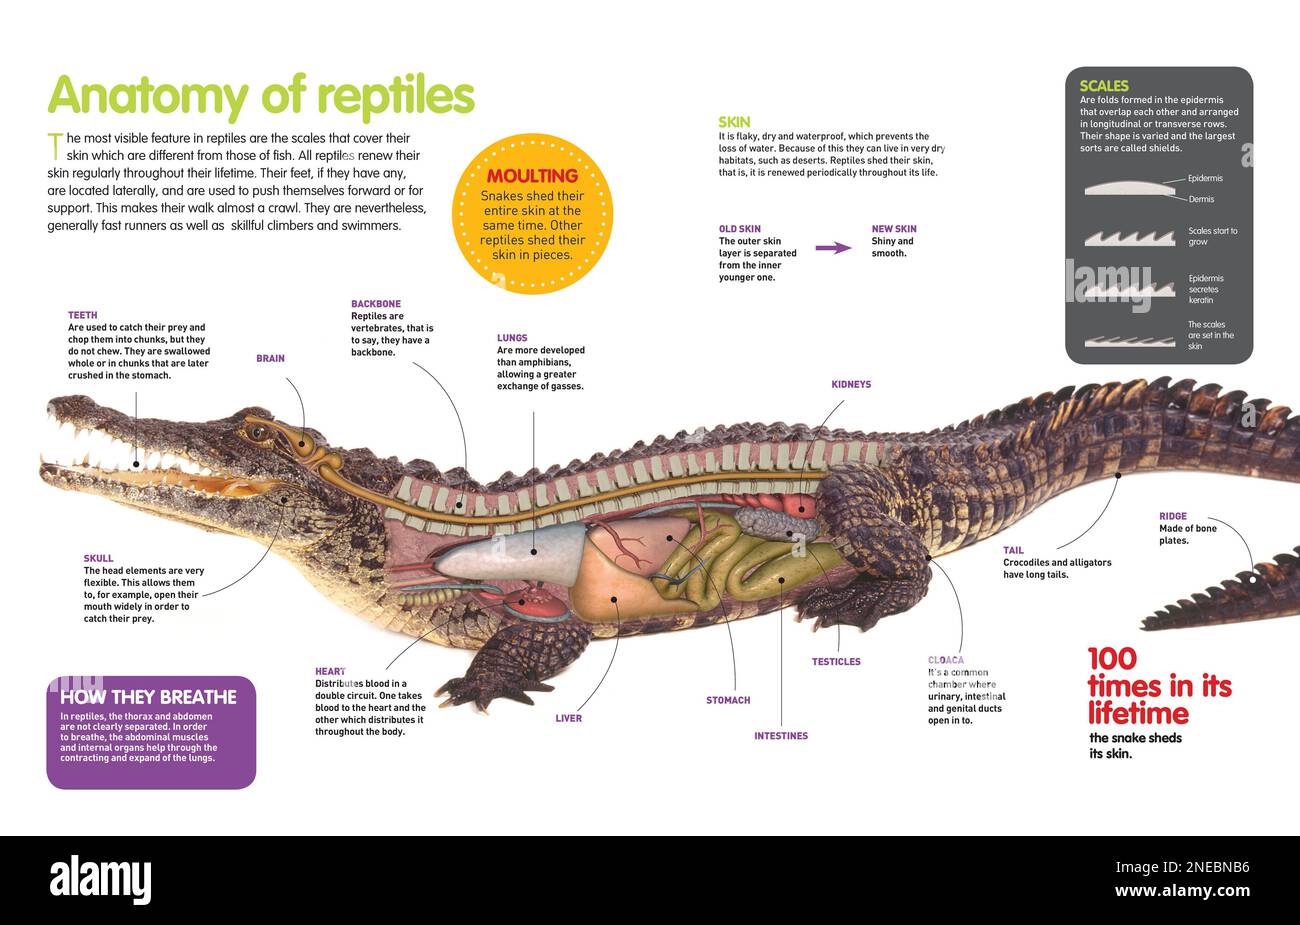 Infographic about the anatomy of the vertebrate reptile that has scales and, in some cases, strong jaws and teeth to cut up it preys. [QuarkXPress (.qxp); Adobe InDesign (.indd); 4960x3188]. Stock Photo